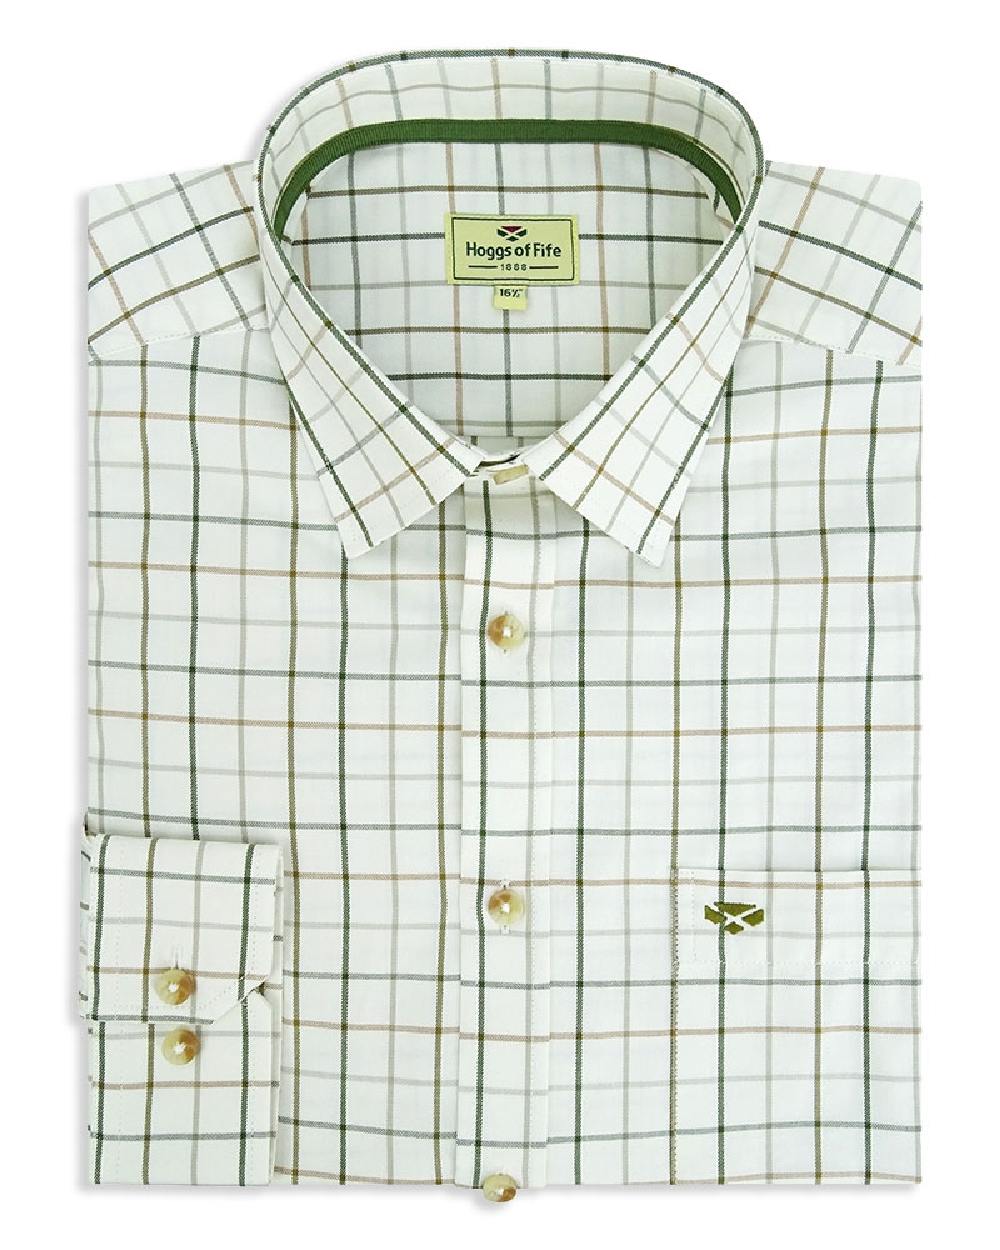 Hoggs of Fife Balmoral Luxury Tattersall Shirt in Green Brown 